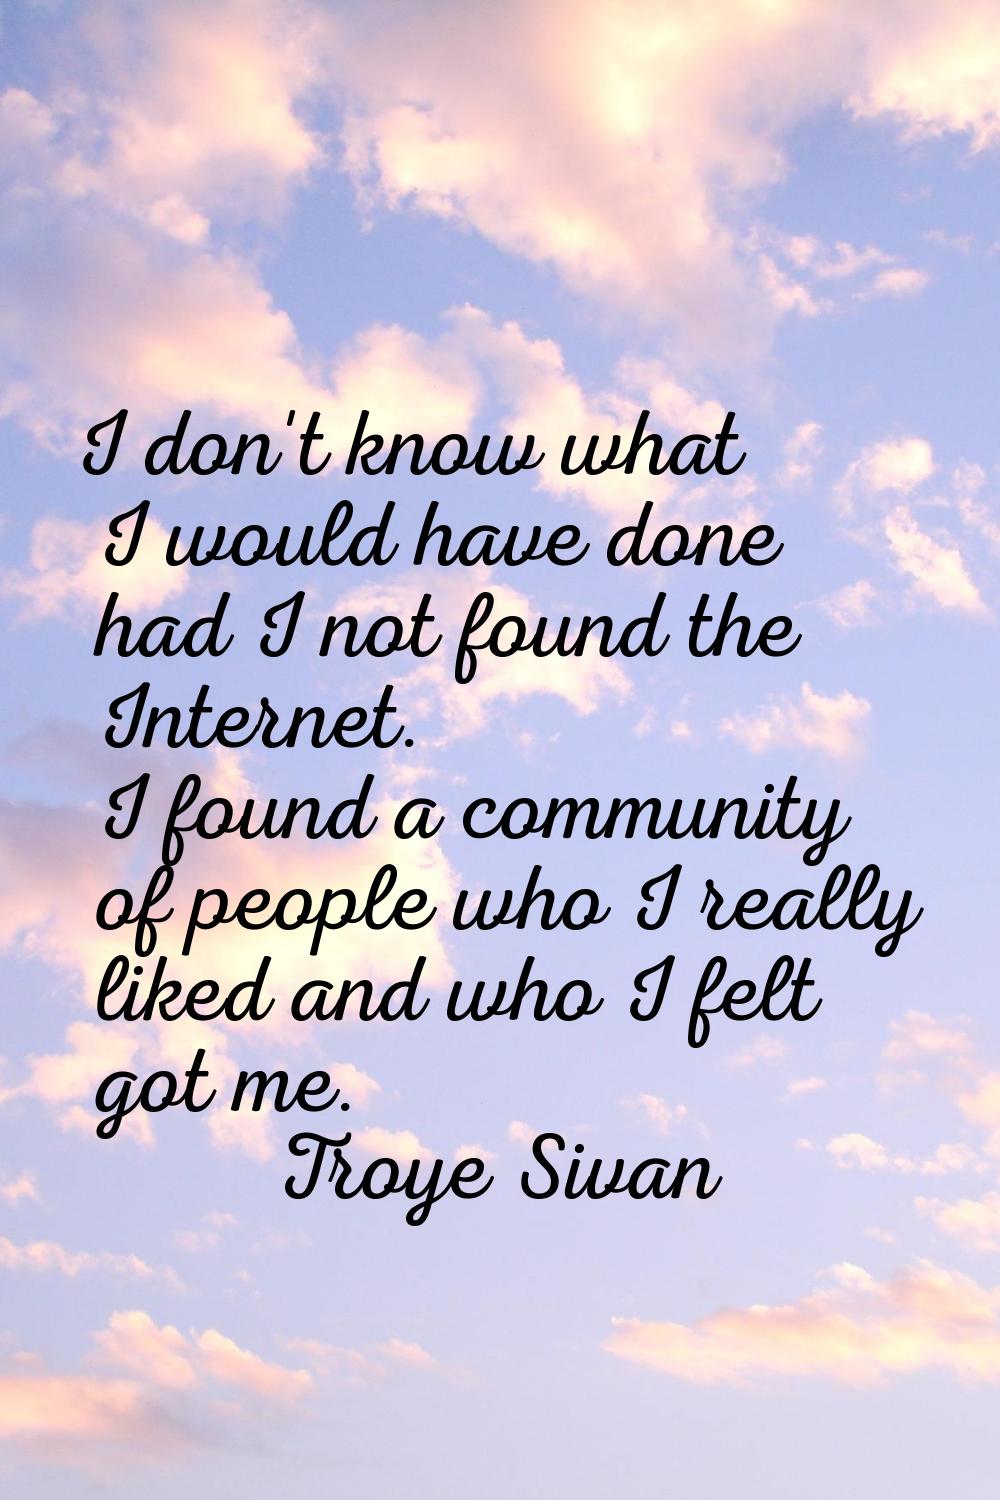 I don't know what I would have done had I not found the Internet. I found a community of people who